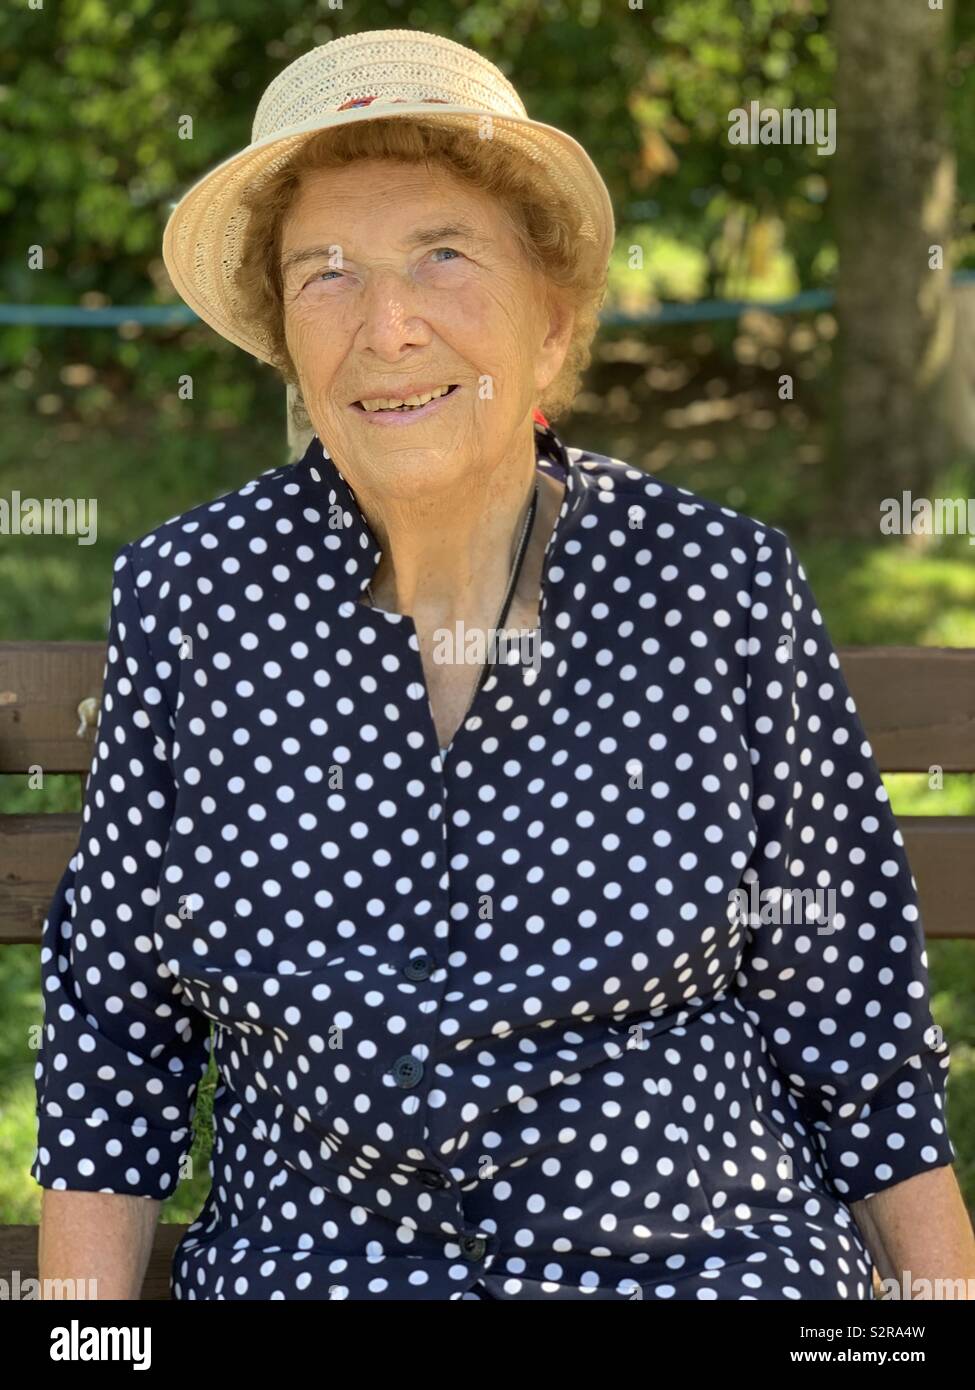 Grandmother portrait with polka dot dress during a summer day Stock Photo